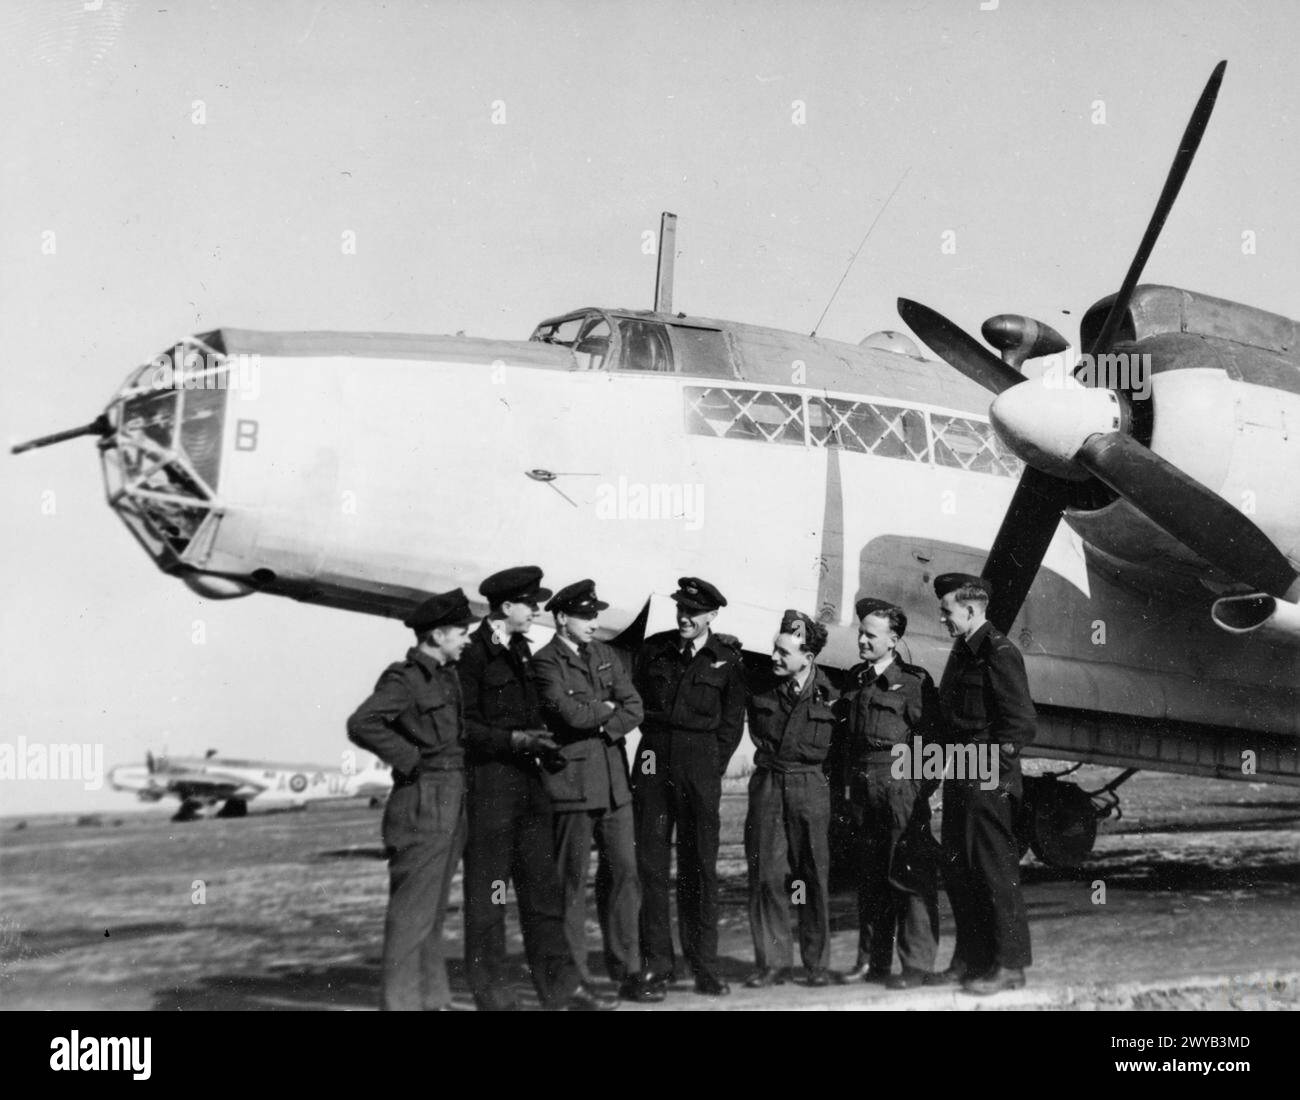 ROYAL AIR FORCE 1939-1945: COASTAL COMMAND - A Warwick V crew of No 179 Squadron, Royal Air Force at St Eval, April 1945. From left to right: Flying Officer R E Crighton RAAF, Flight Lieutenant W M O'Dwyer RAAF, Flying Officer G R Leighton RAAF, Flying Officer C A Donnelly RAAF, Sergeant B Braier RAF, Warrant Officer F W Appleton RAAFand Warrant Officer G R Clarke RAAF. , Royal Air Force, Royal Air Force Regiment, Sqdn, 179 Stock Photo